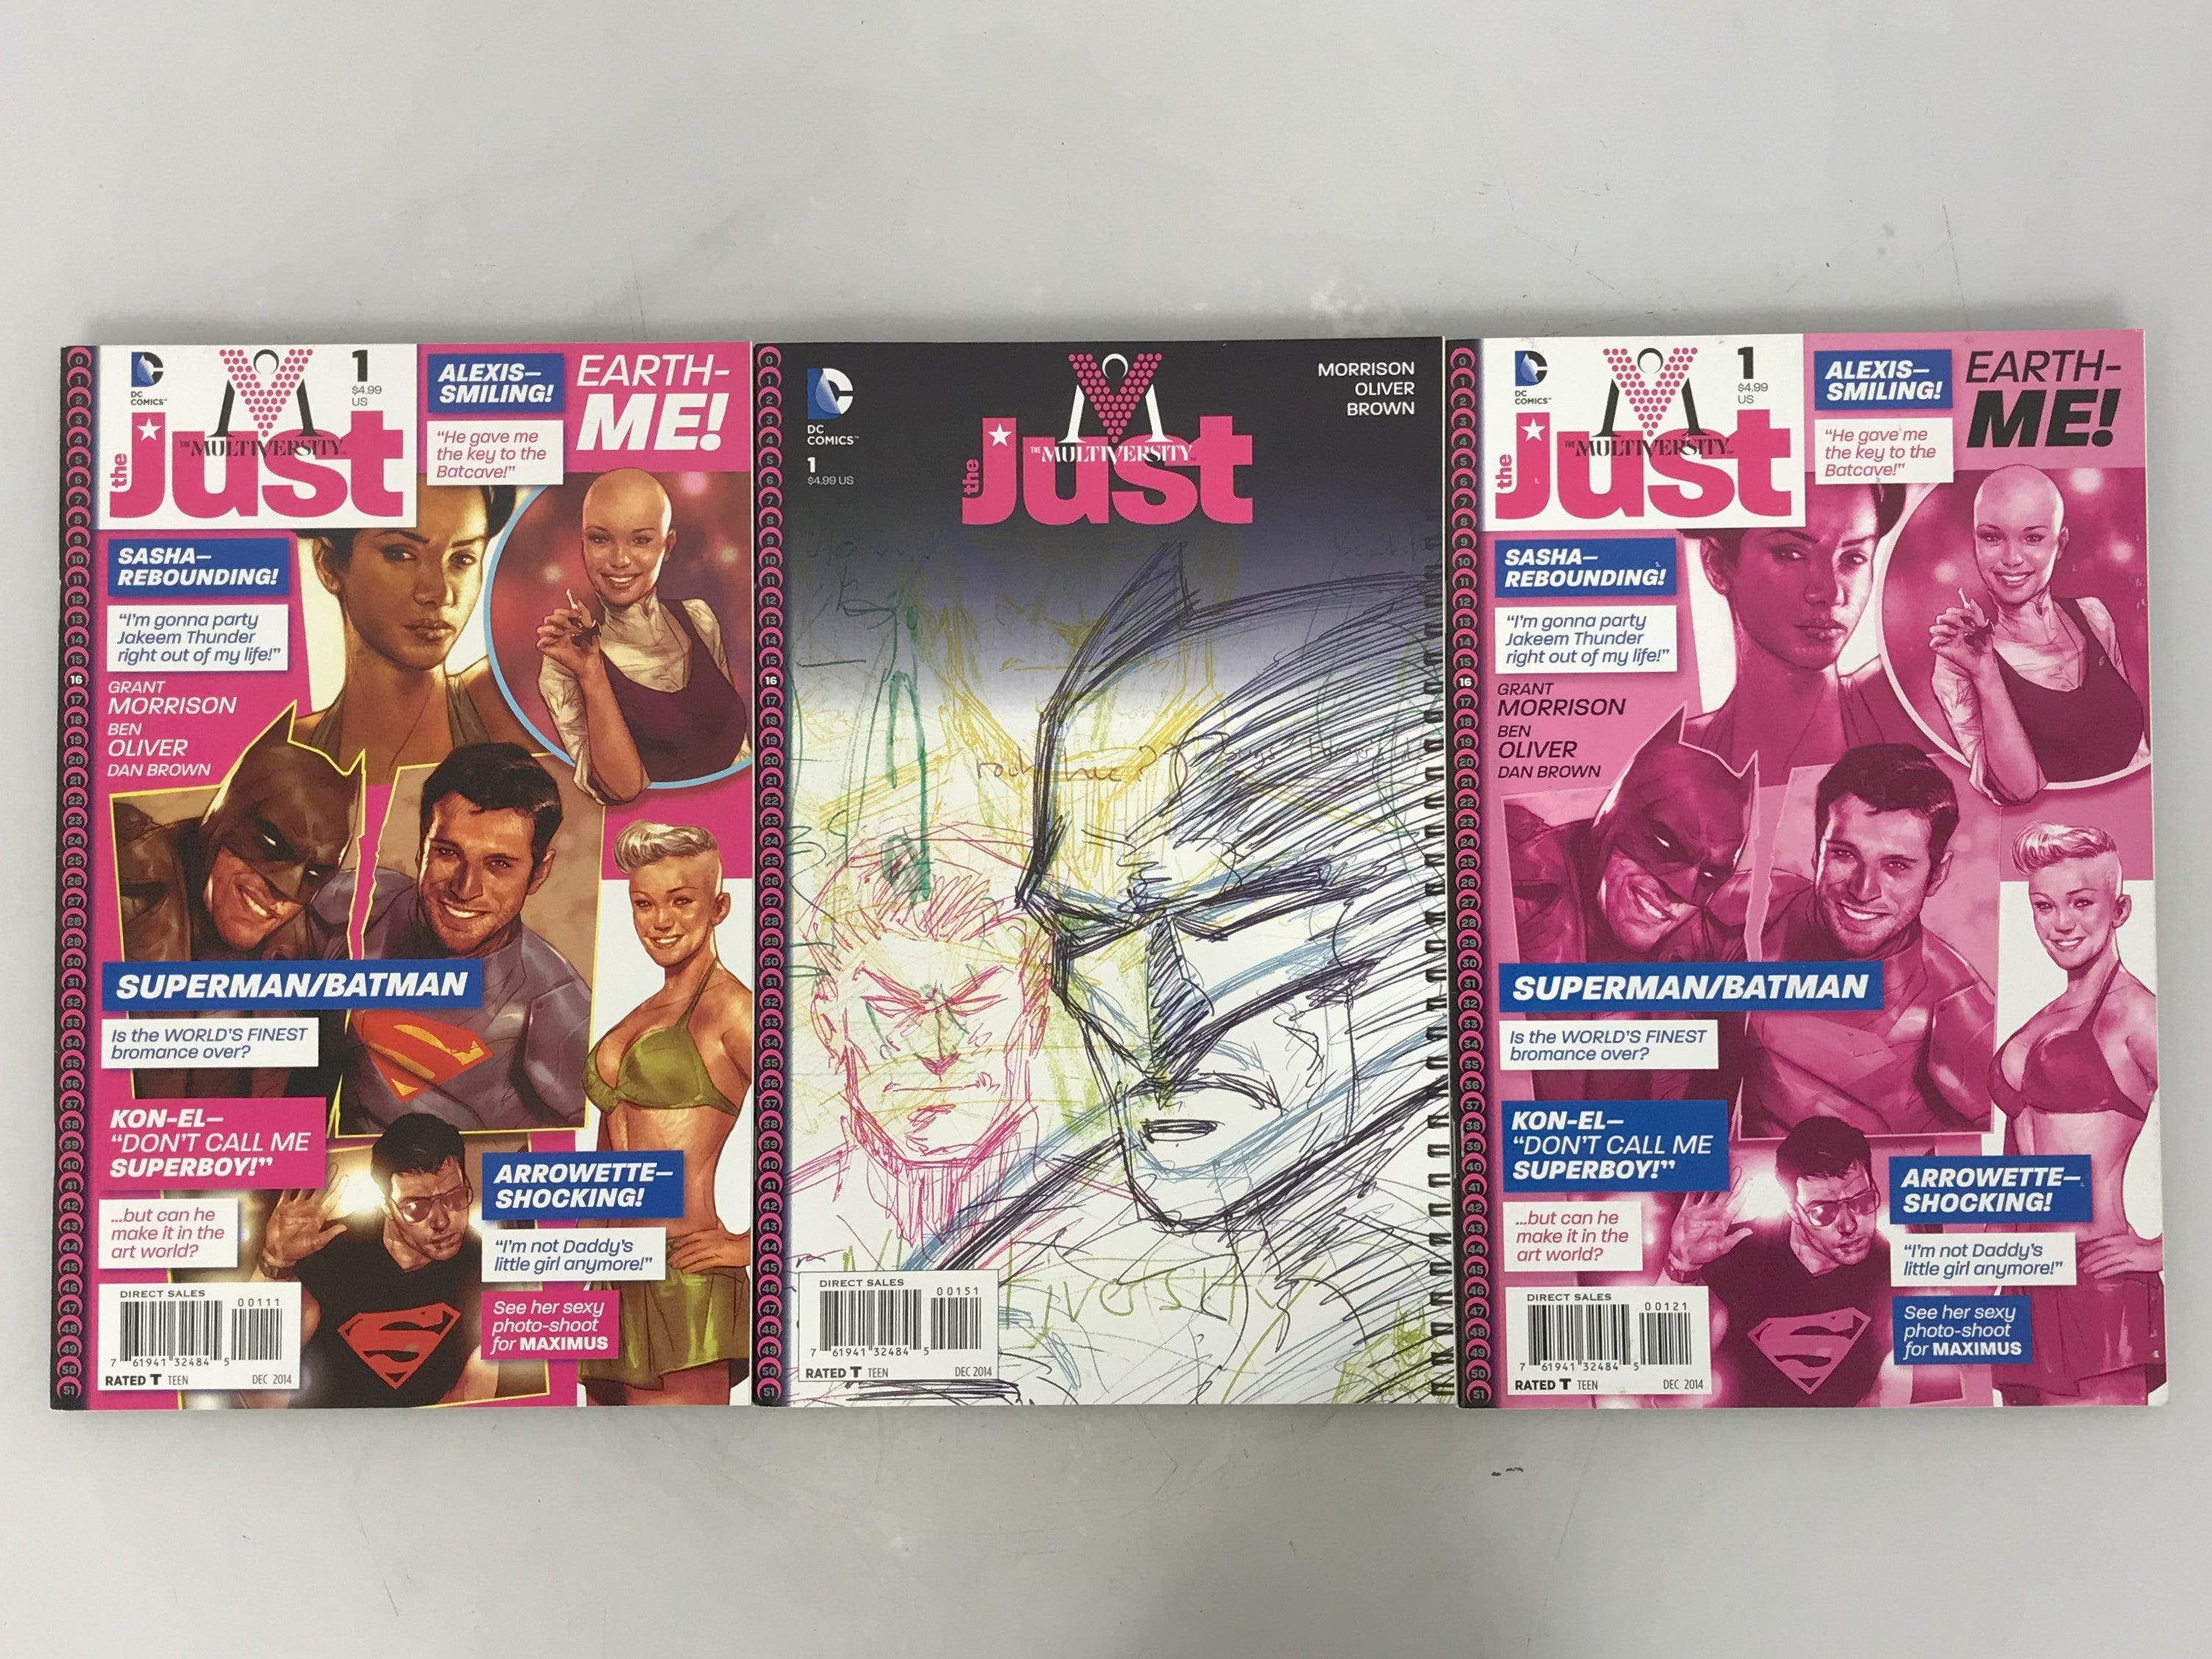 Lot of 3 The Multiverse: The Just 1 2014 Variant Covers